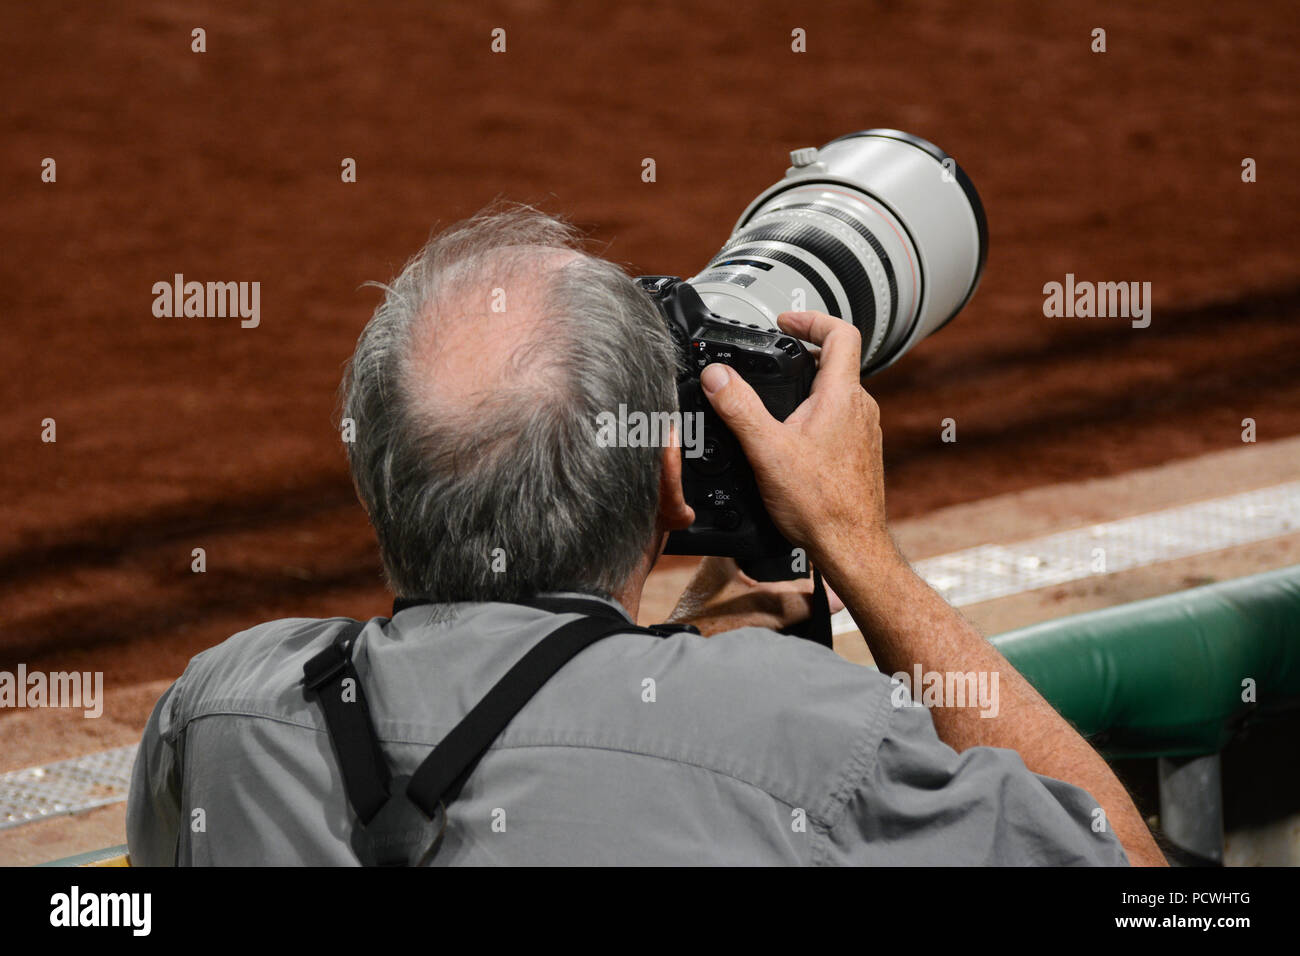 A professional sports photographer with a long telephoto lens focuses on the action at an MLB baseball game Stock Photo